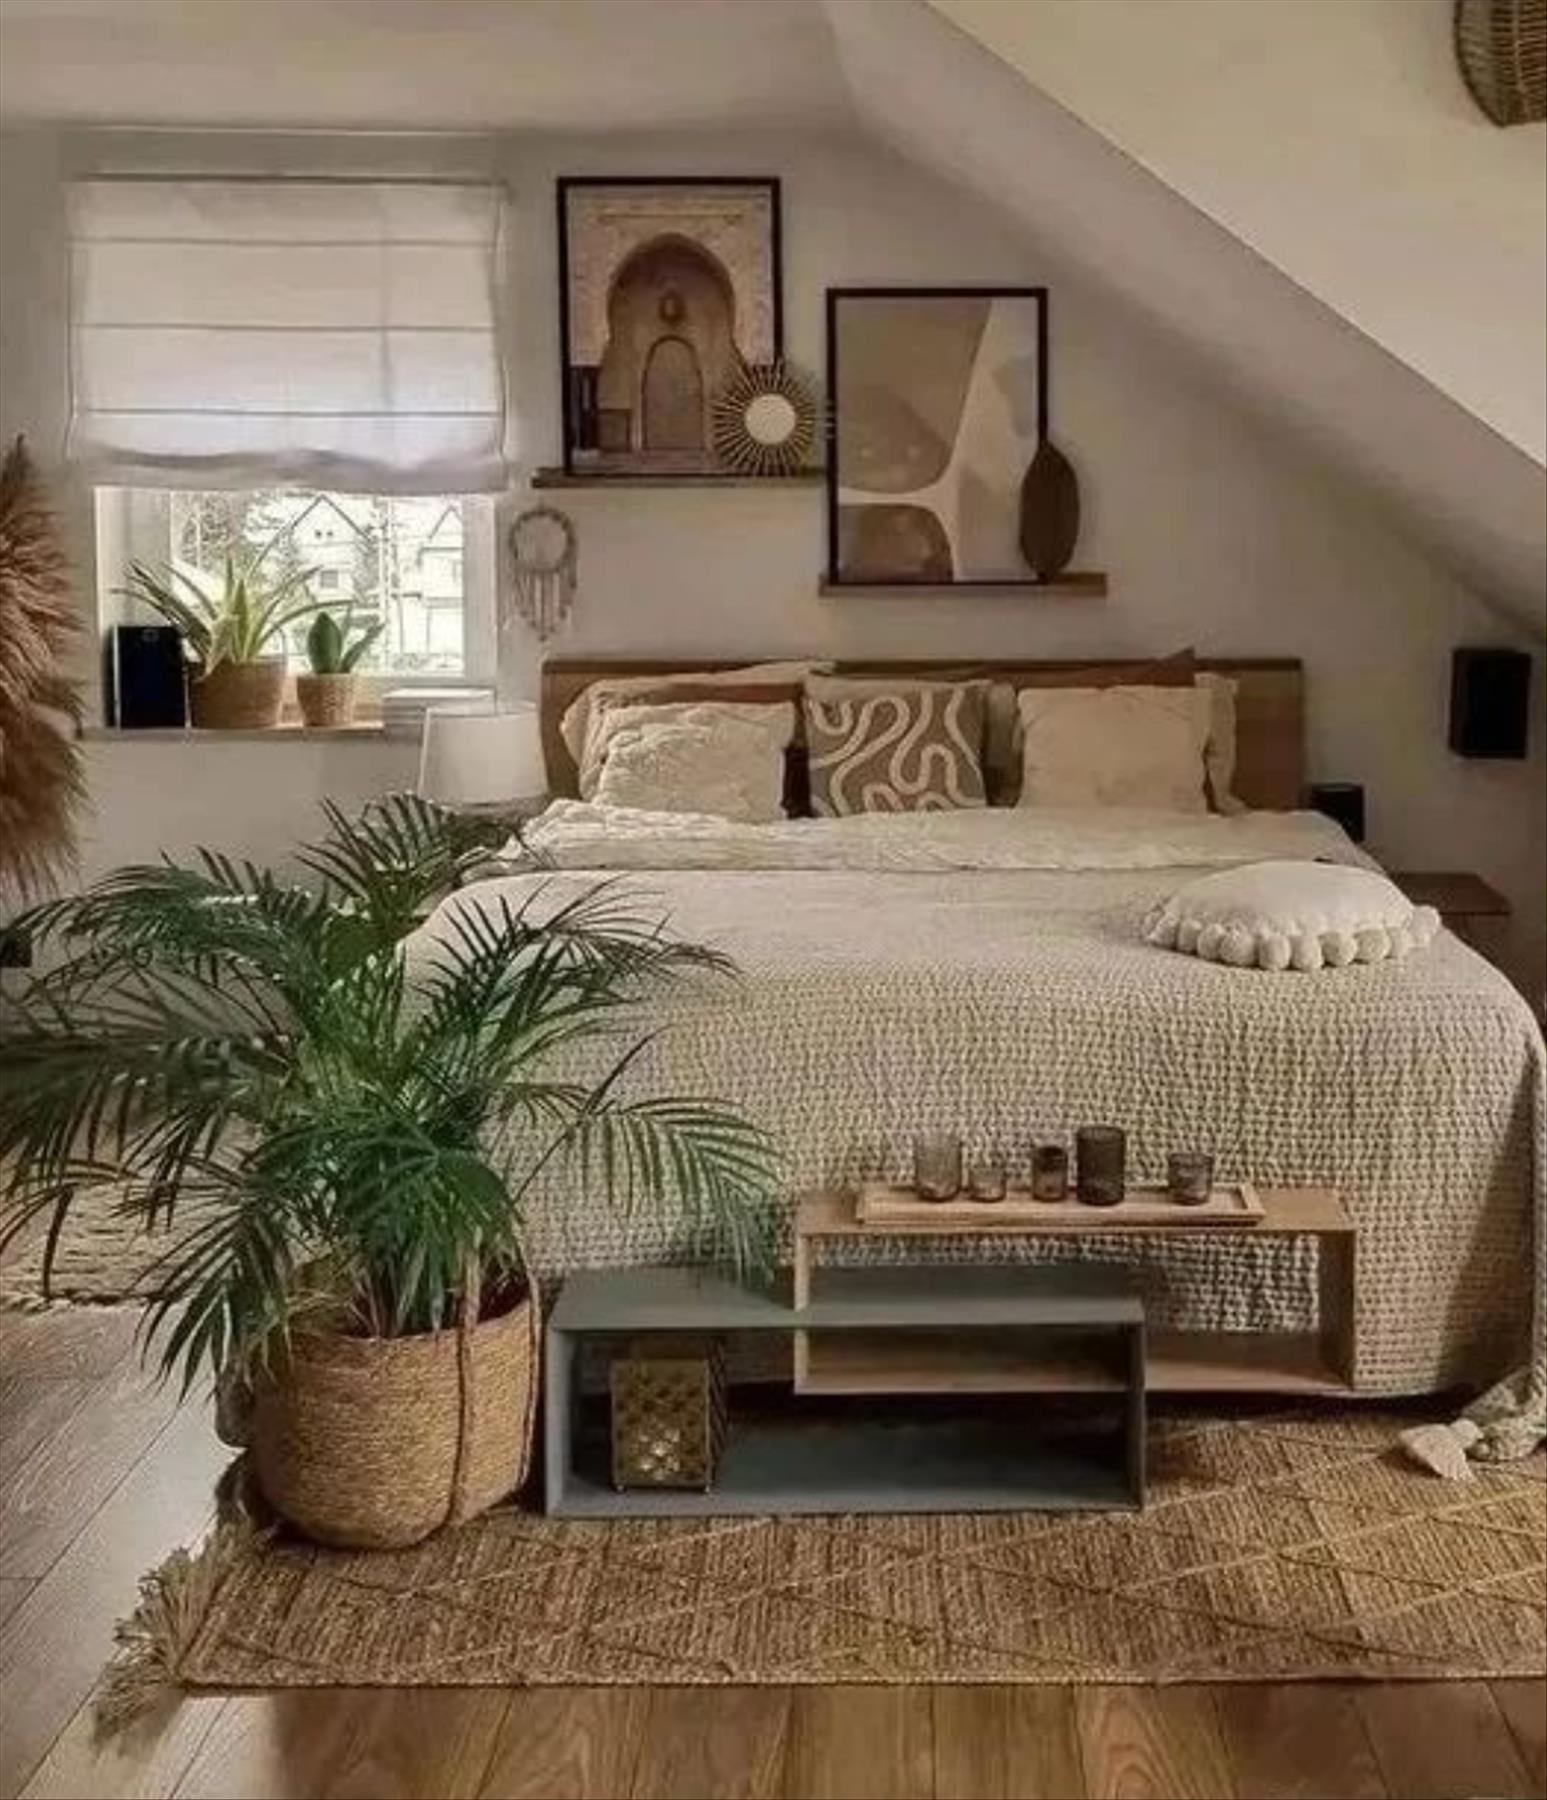 Chic Bohemian Bedroom Ideas for Small Rooms Teenage Girls will love